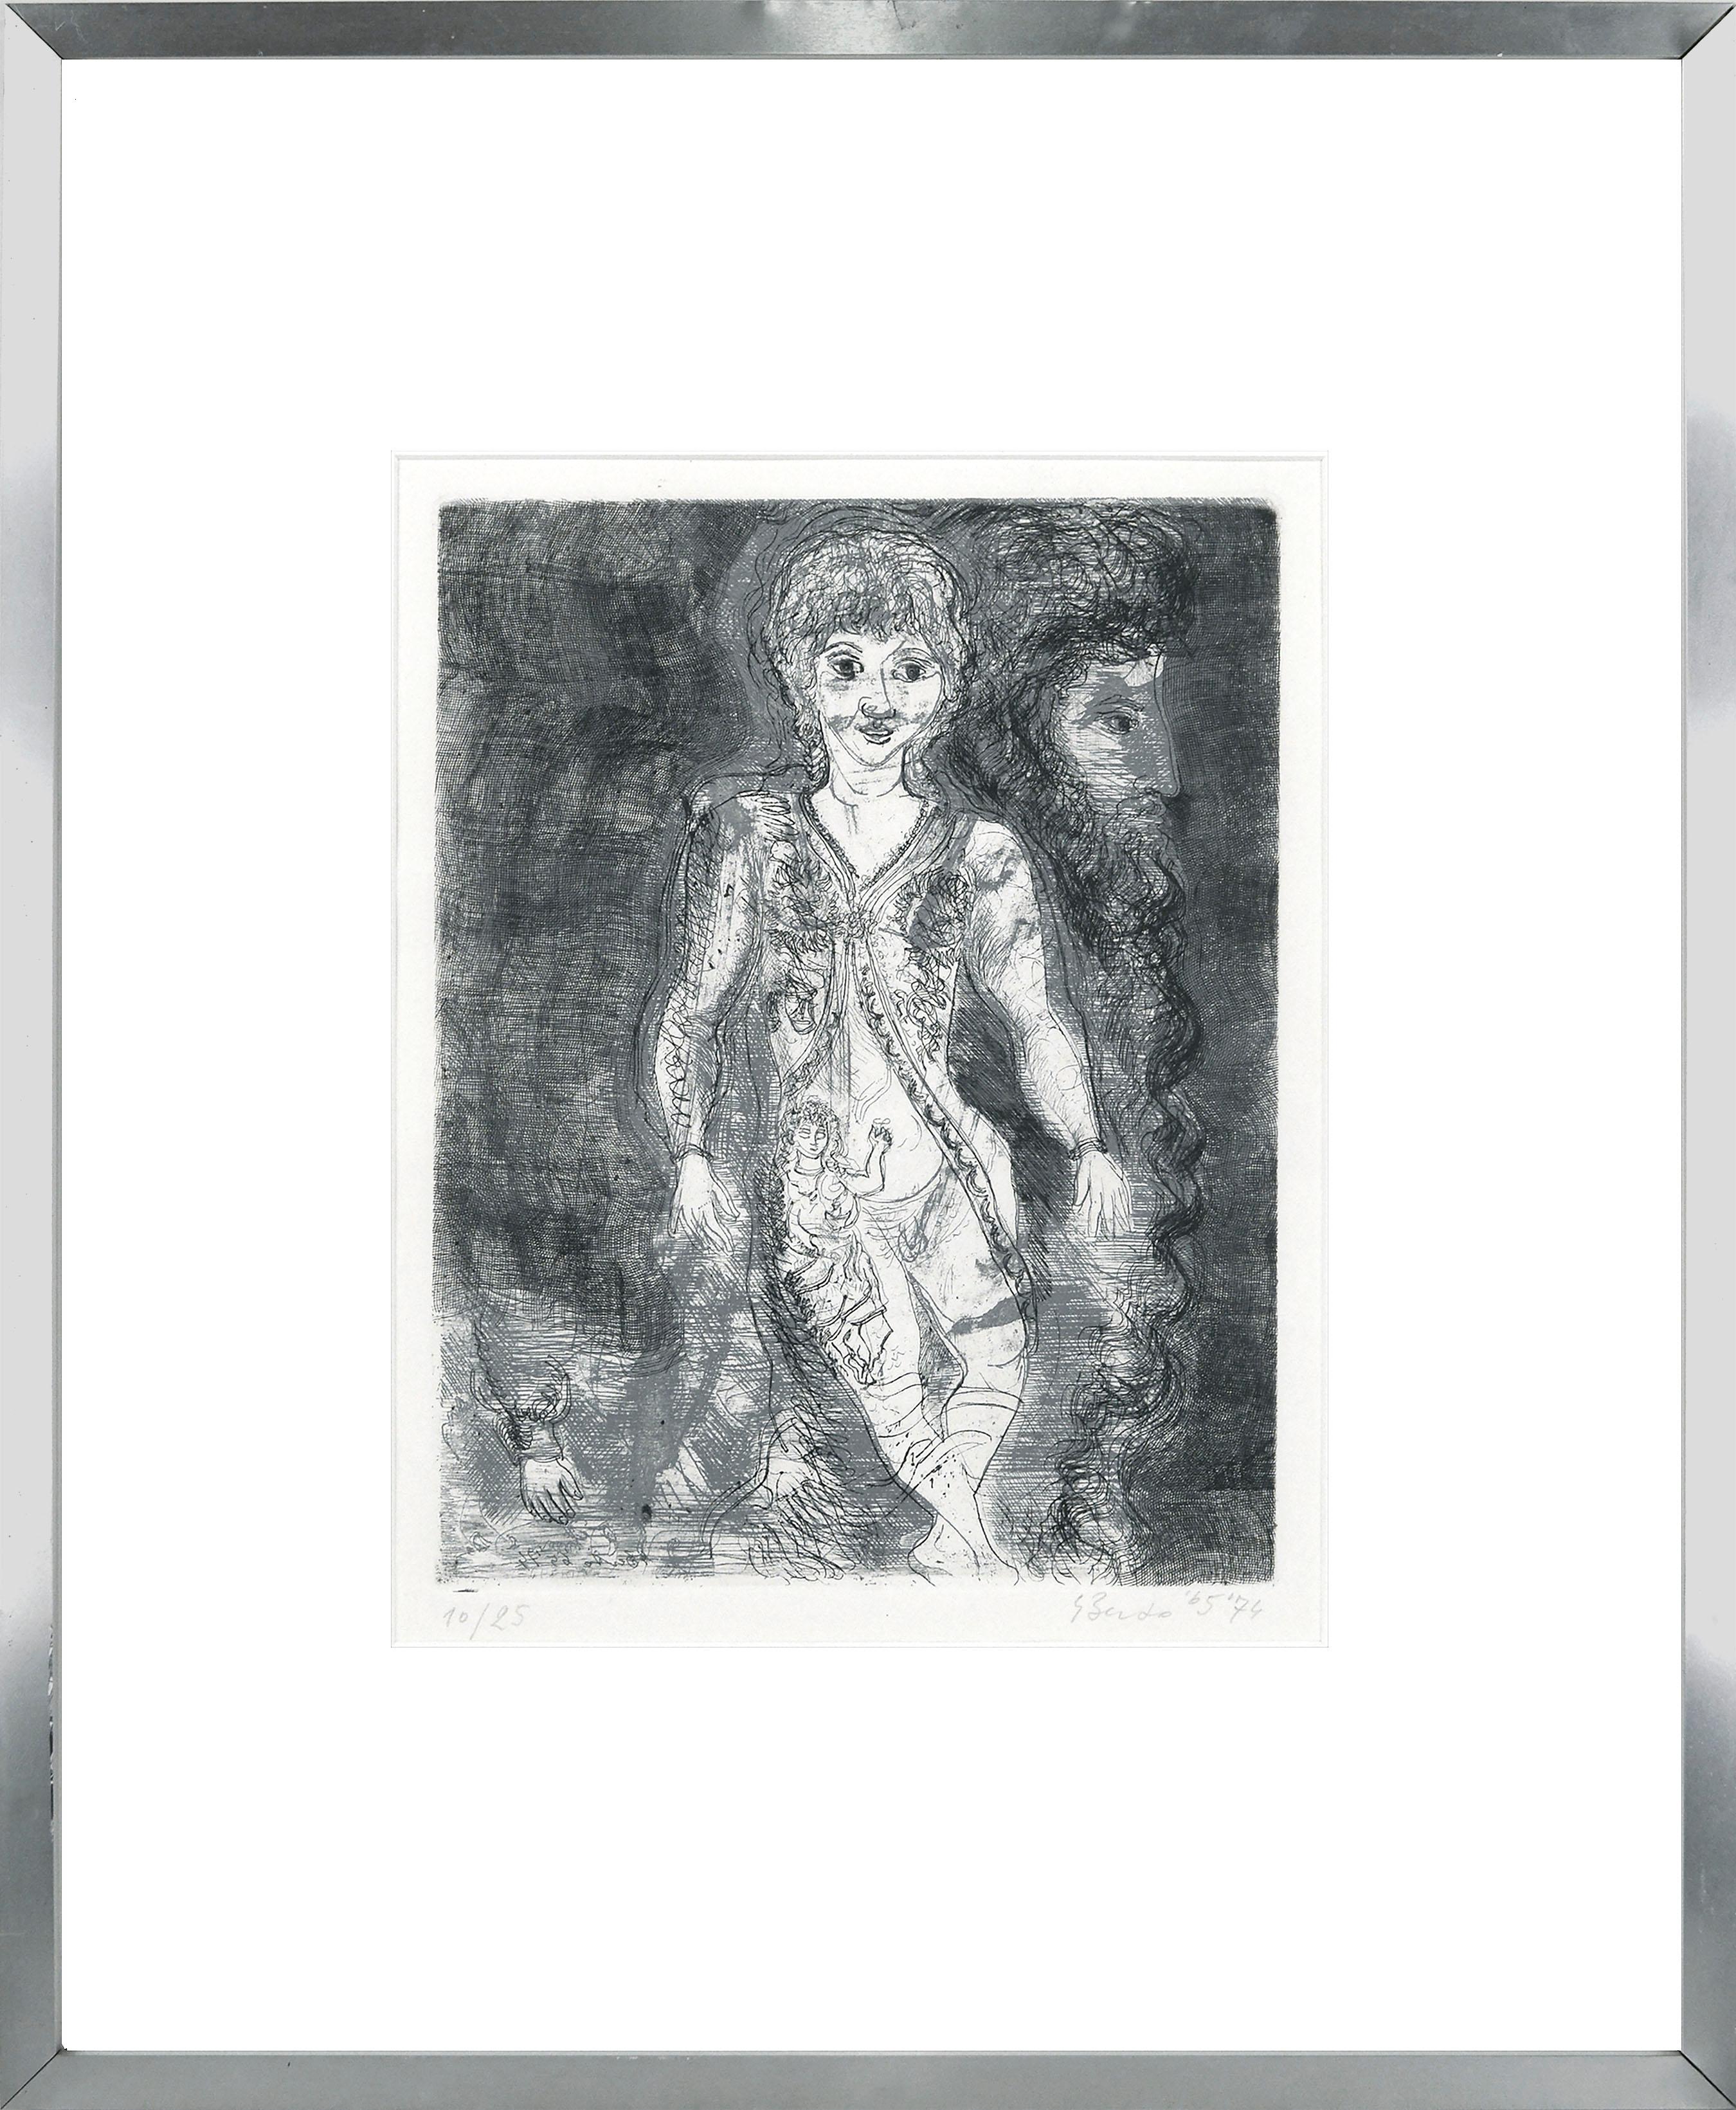 Gianpaolo Berto Figurative Print - Mid Century Modern Figurative Etching of a Man & Woman, Signed Limited Edition